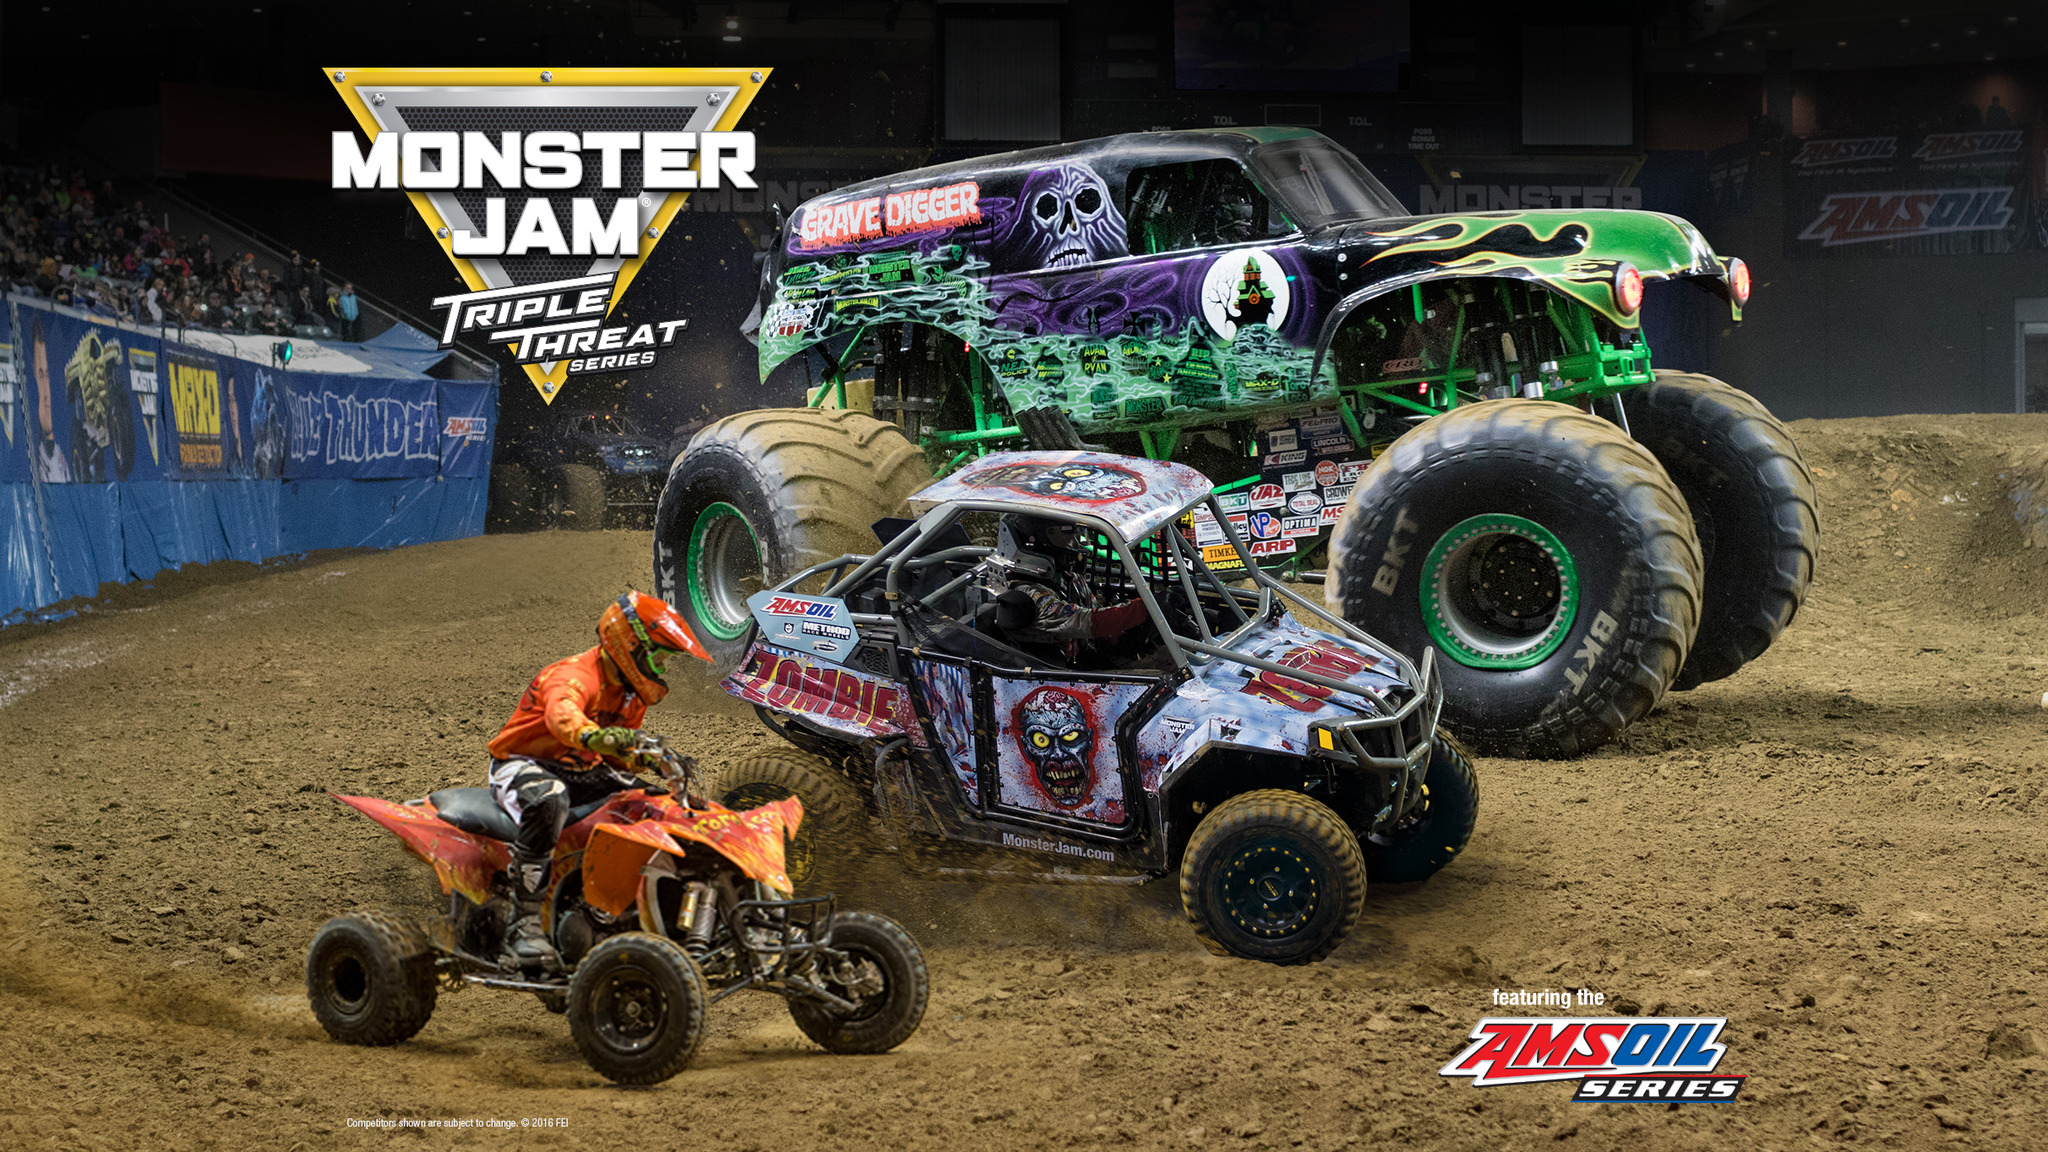 Monster Jam Triple Threat Series presented by AMSOIL Tickets Single